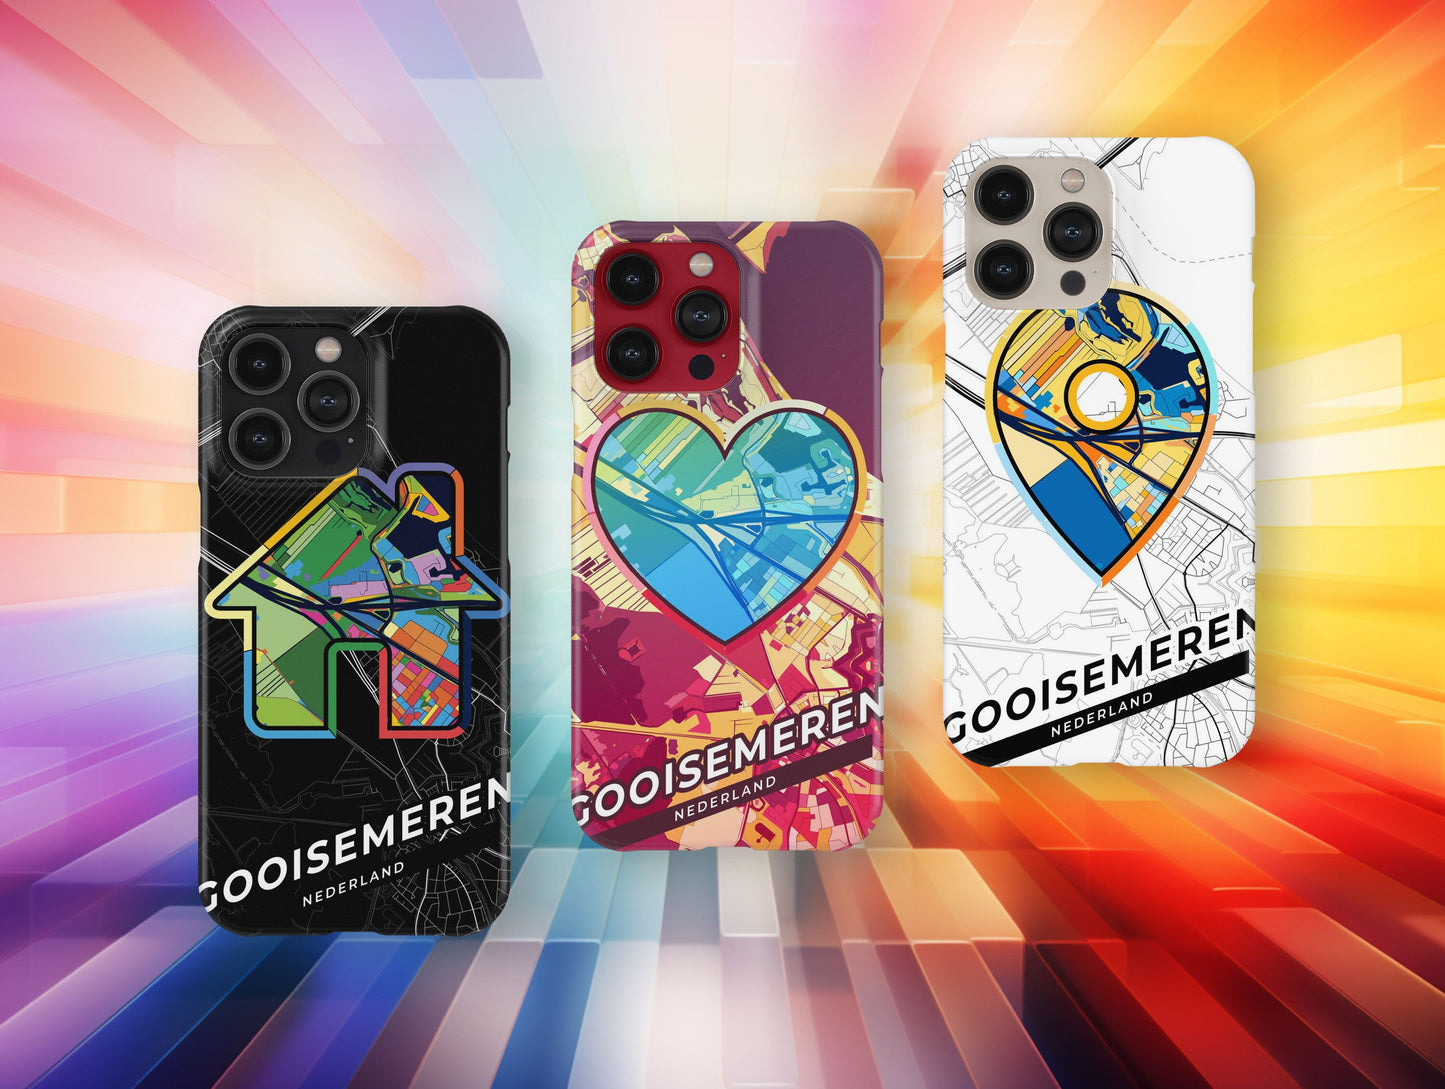 Gooise Meren Netherlands slim phone case with colorful icon. Birthday, wedding or housewarming gift. Couple match cases.